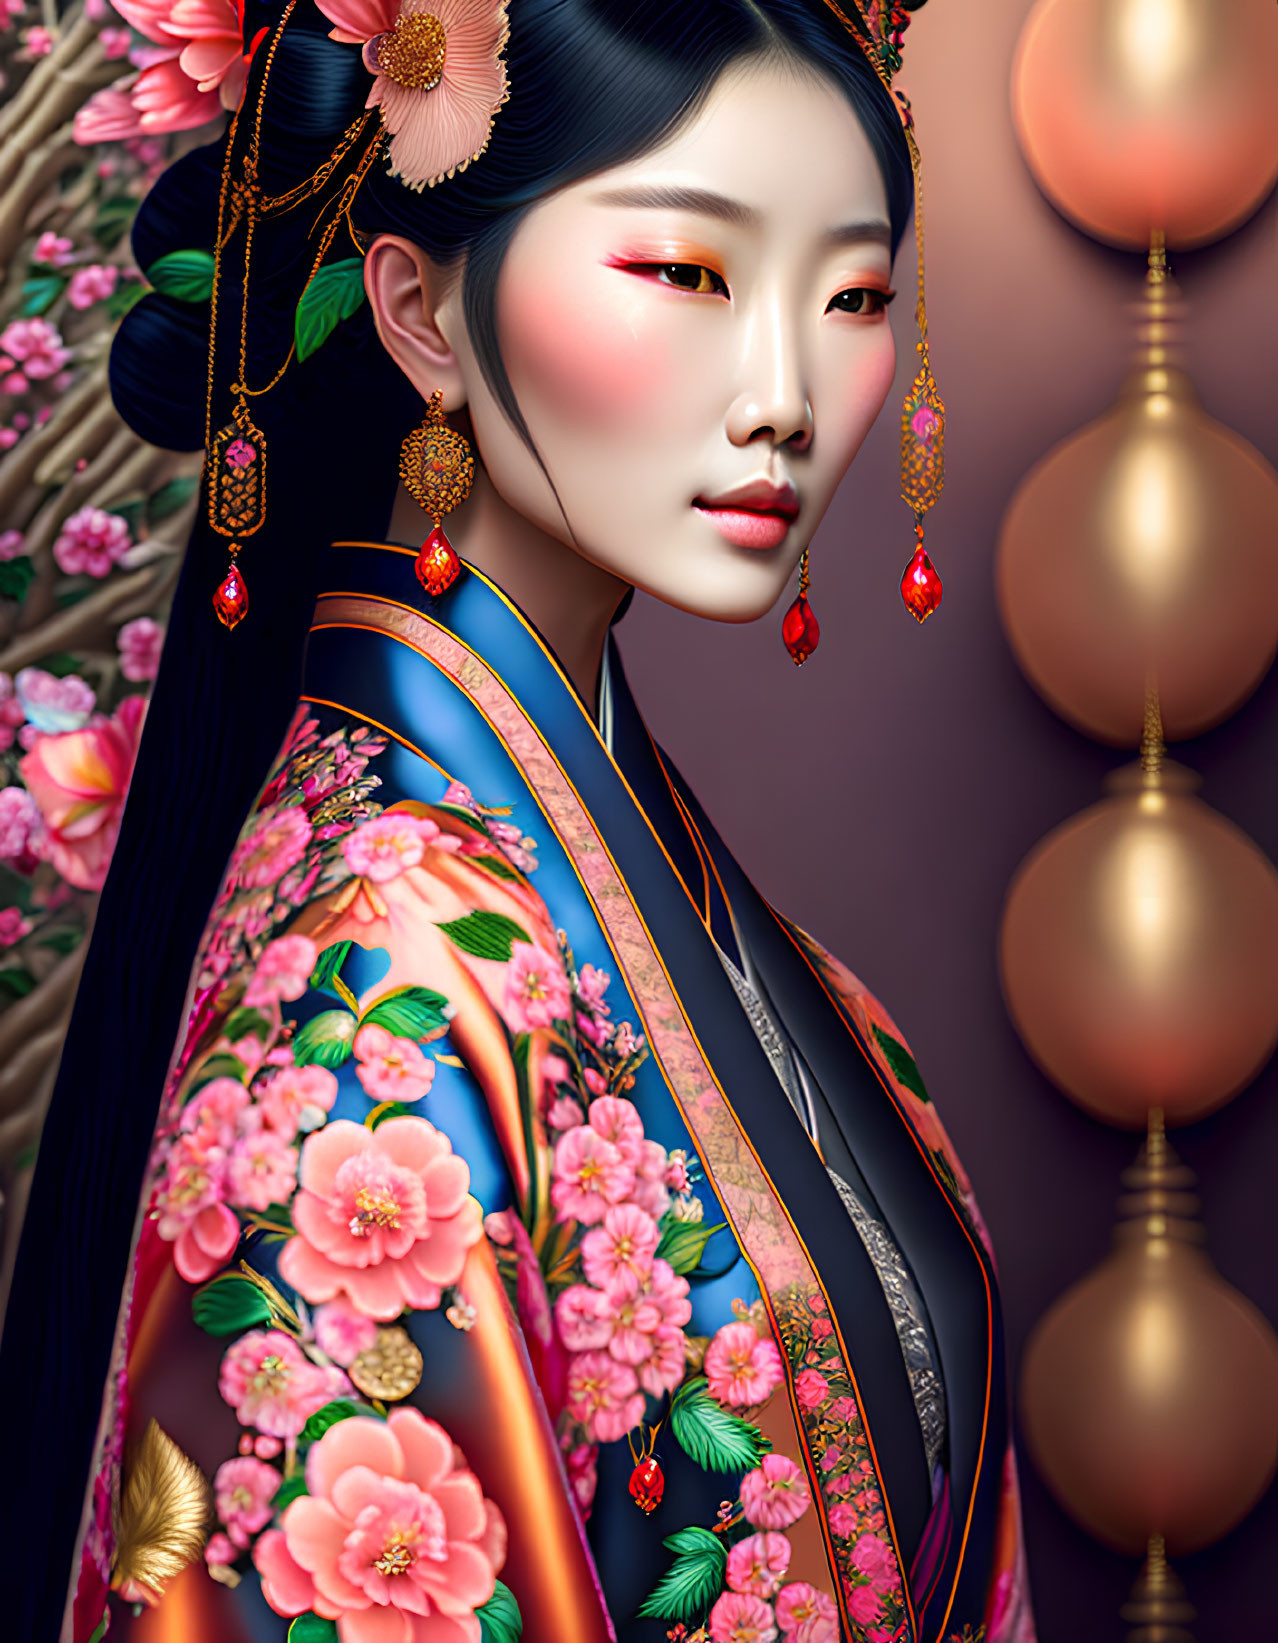 Detailed traditional Asian attire artwork with floral patterns and intricate jewelry.